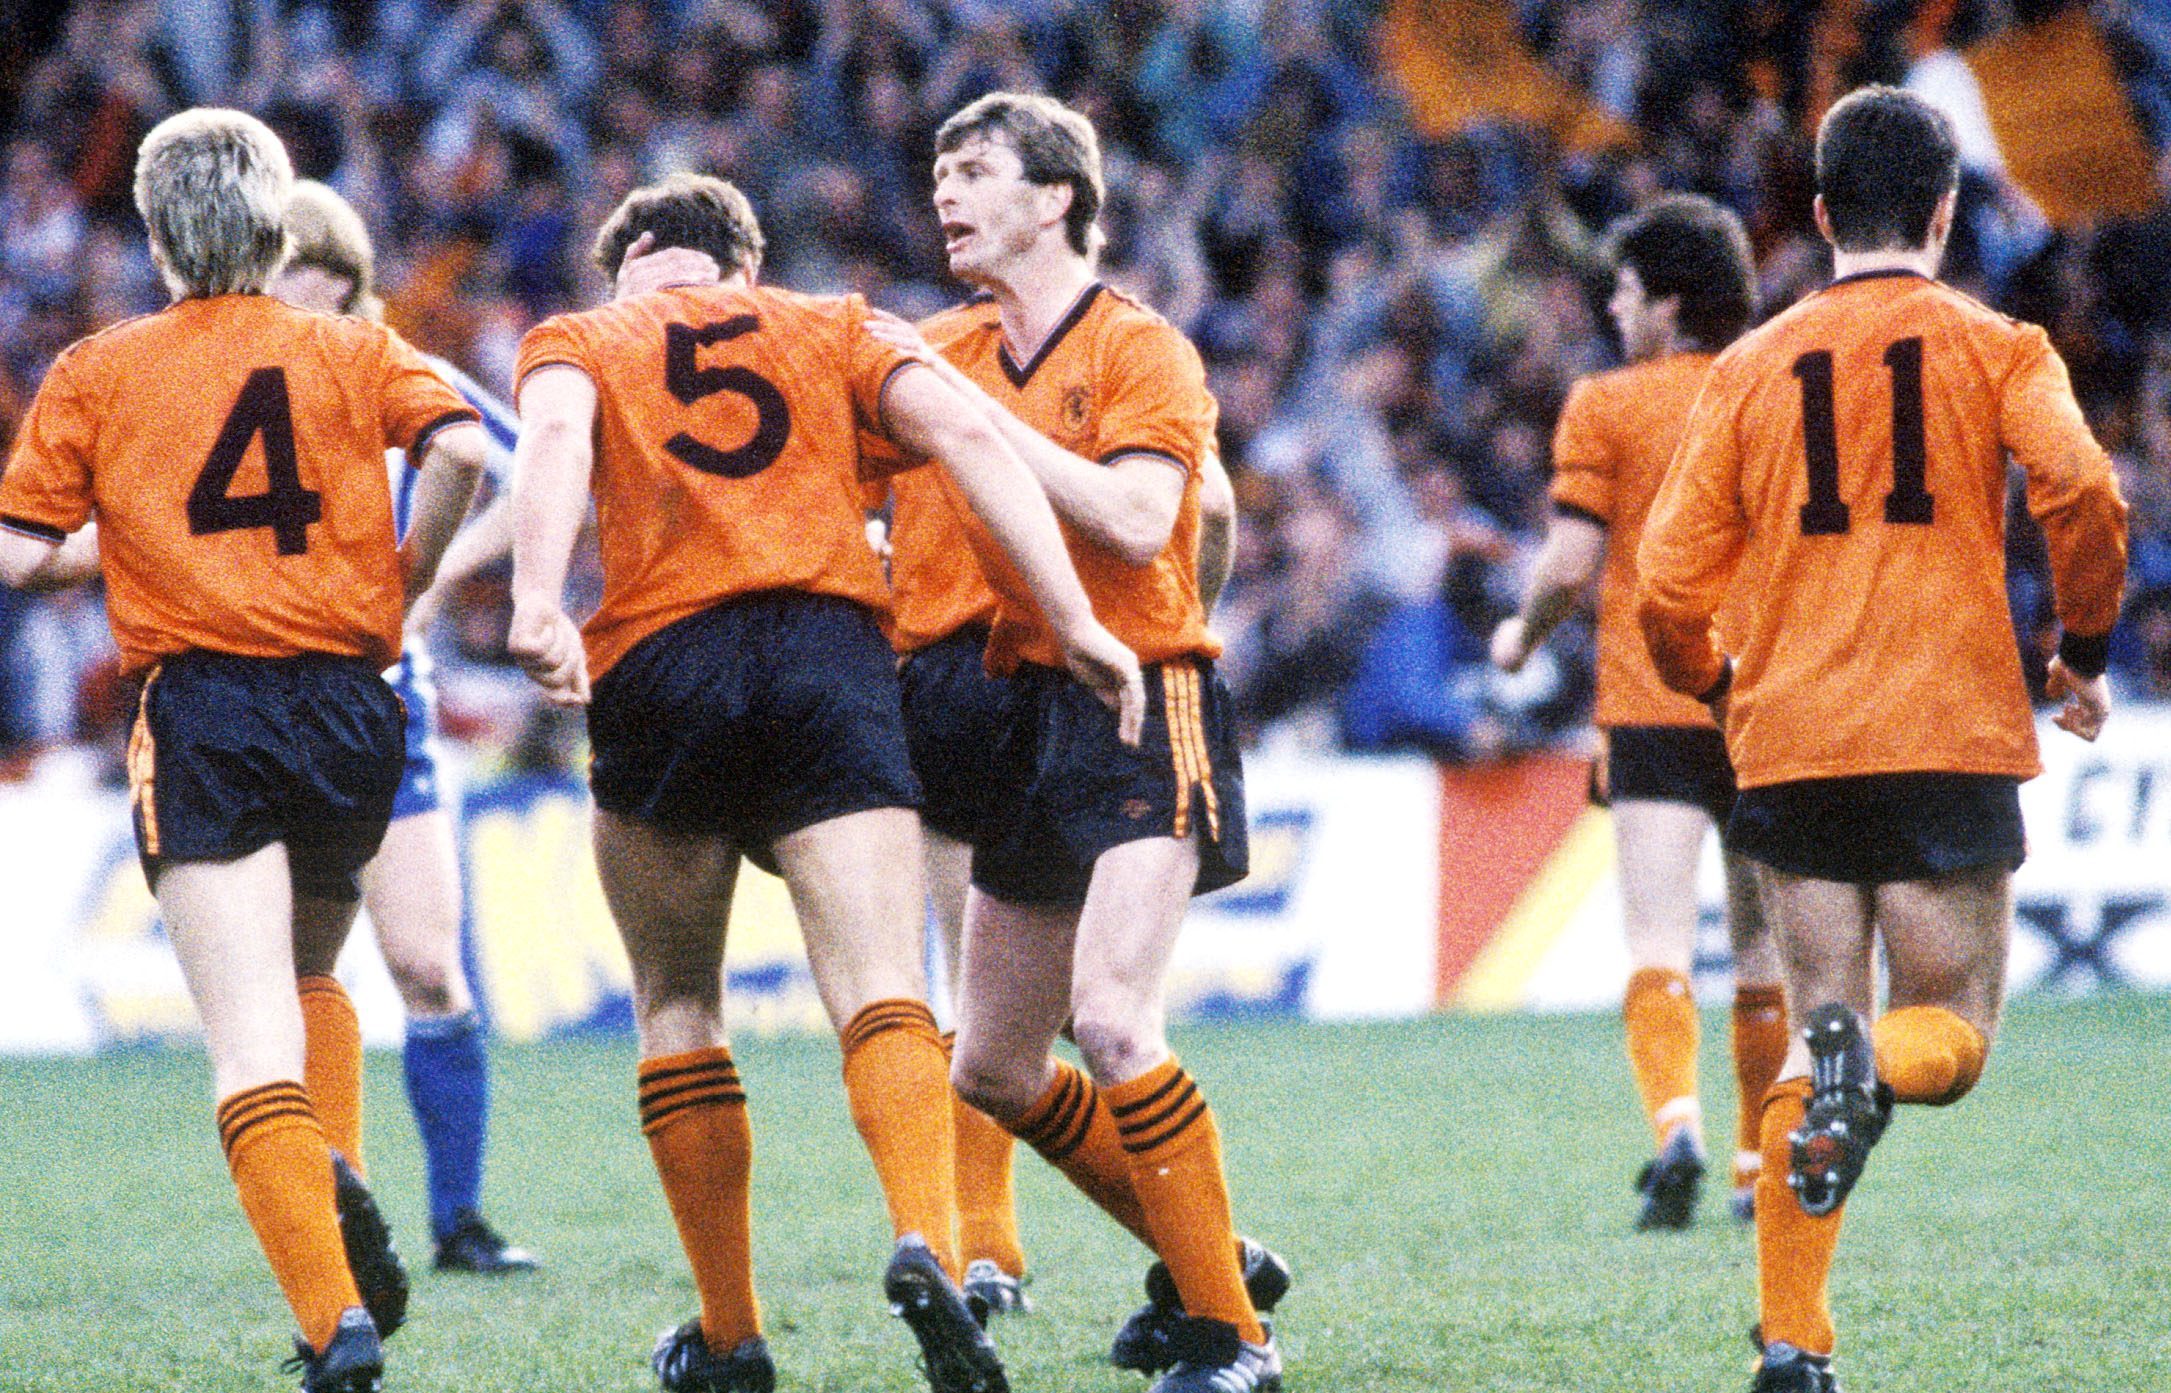 Scottish teams must strive for European glory like Dundee United in 1987.